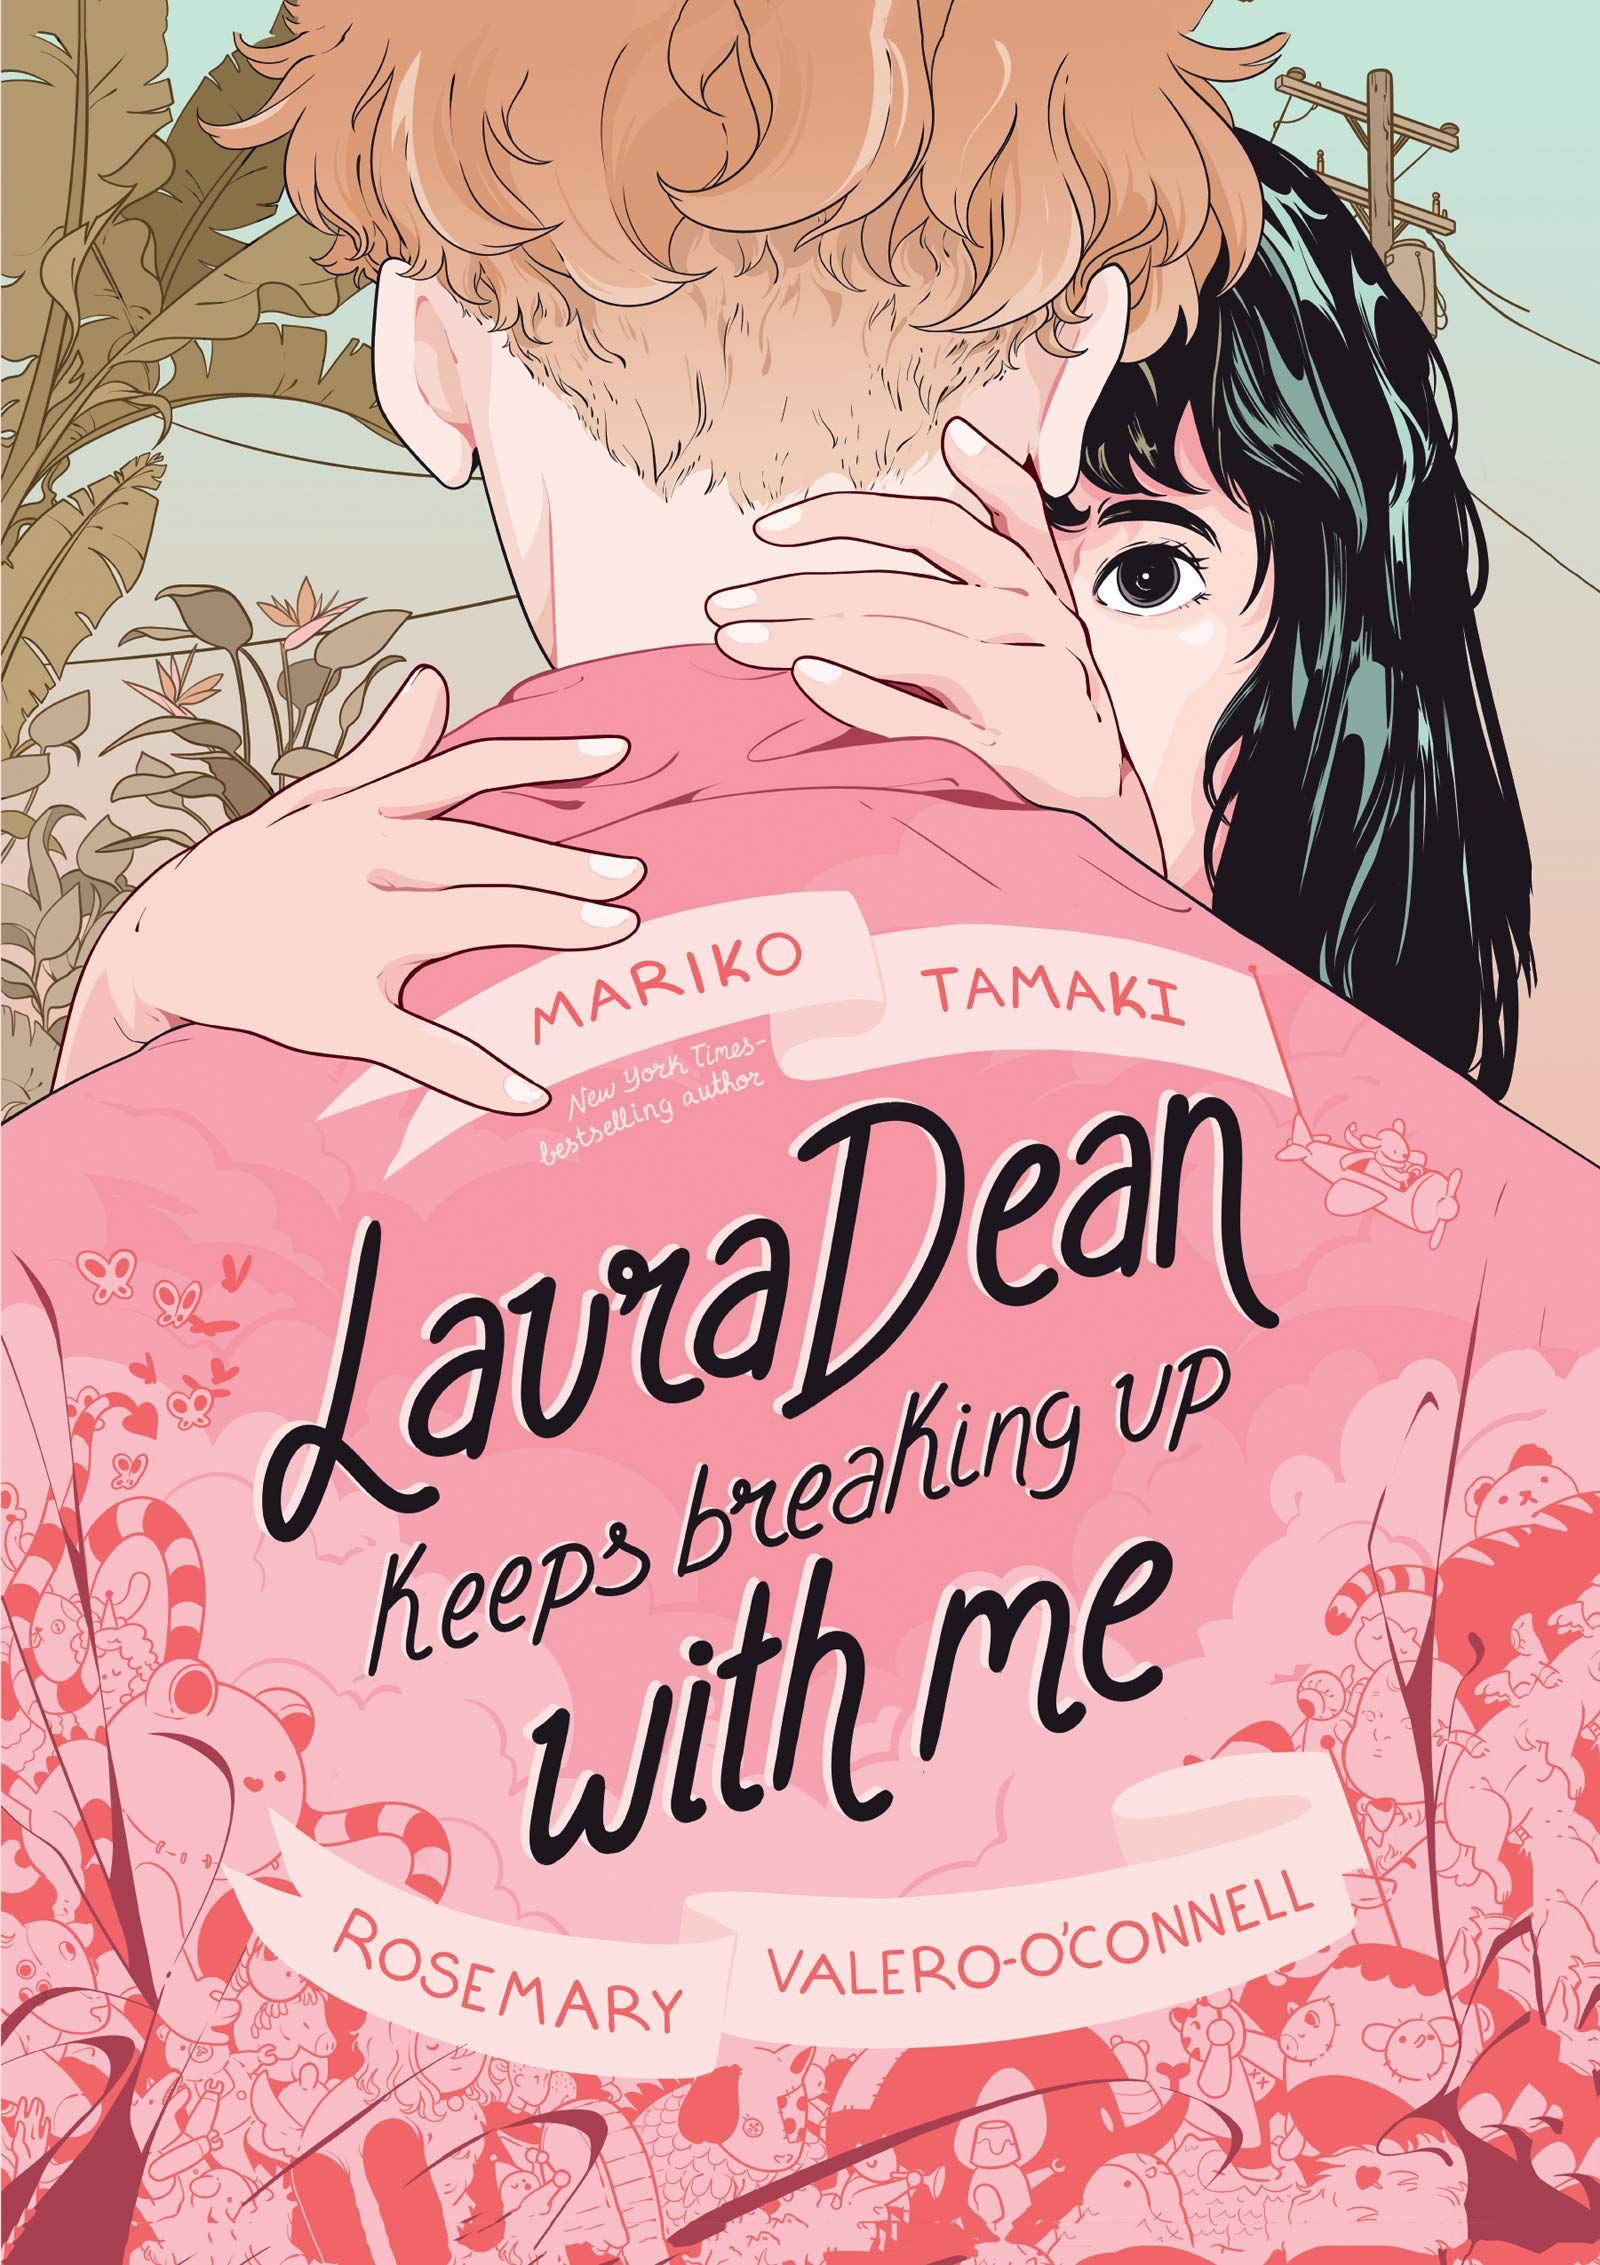 Laura Dean Keeps Breaking Up With Me graphic novel cover